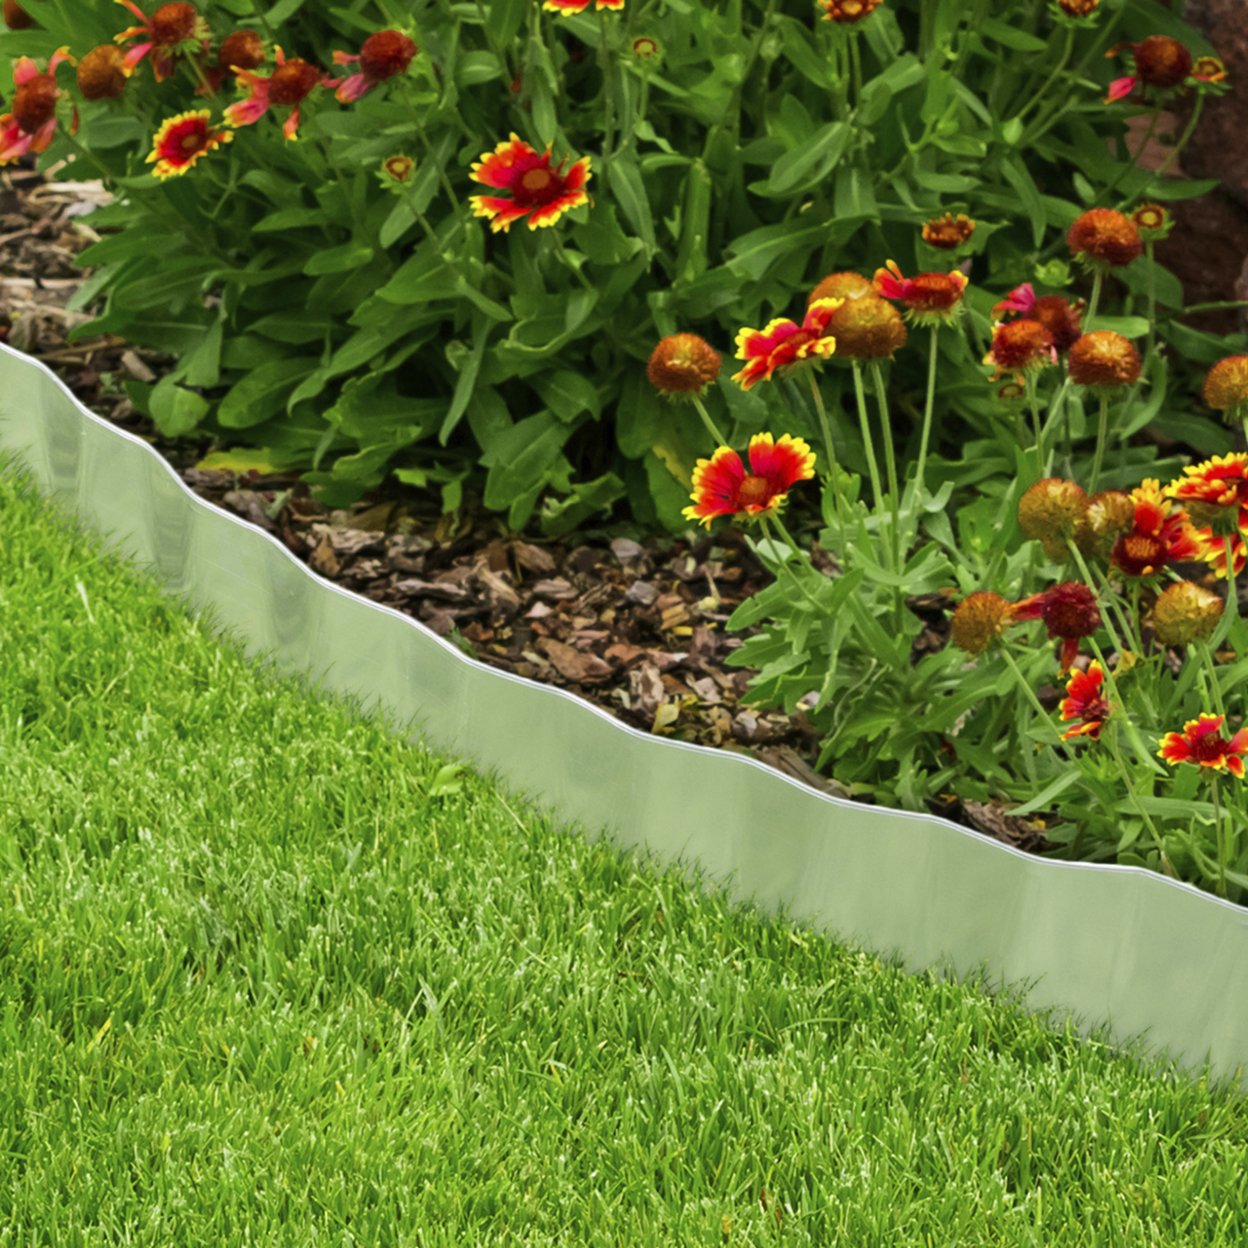 Galvanized Steel Lawn Edging Landscape, Plant And Garden Border 6.25 Inches X 16 Feet L By Pure Garden For Flowerbeds, Gardens